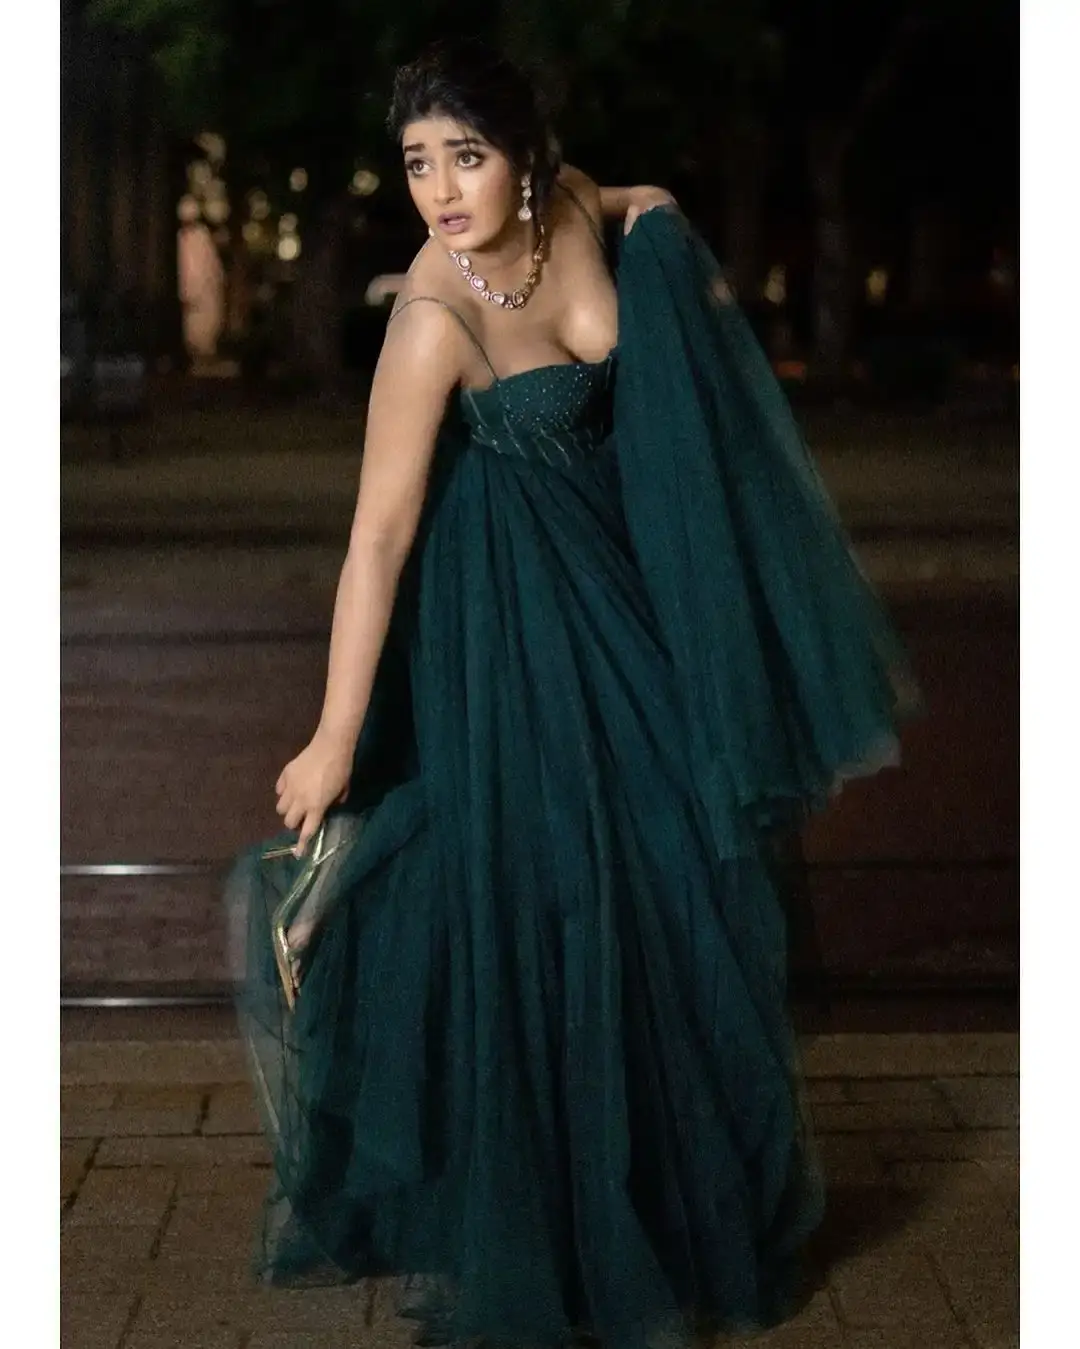 HYDERABAD GIRL DIMPLE HAYATHI IN BEAUTIFUL LONG GREEN GOWN 7